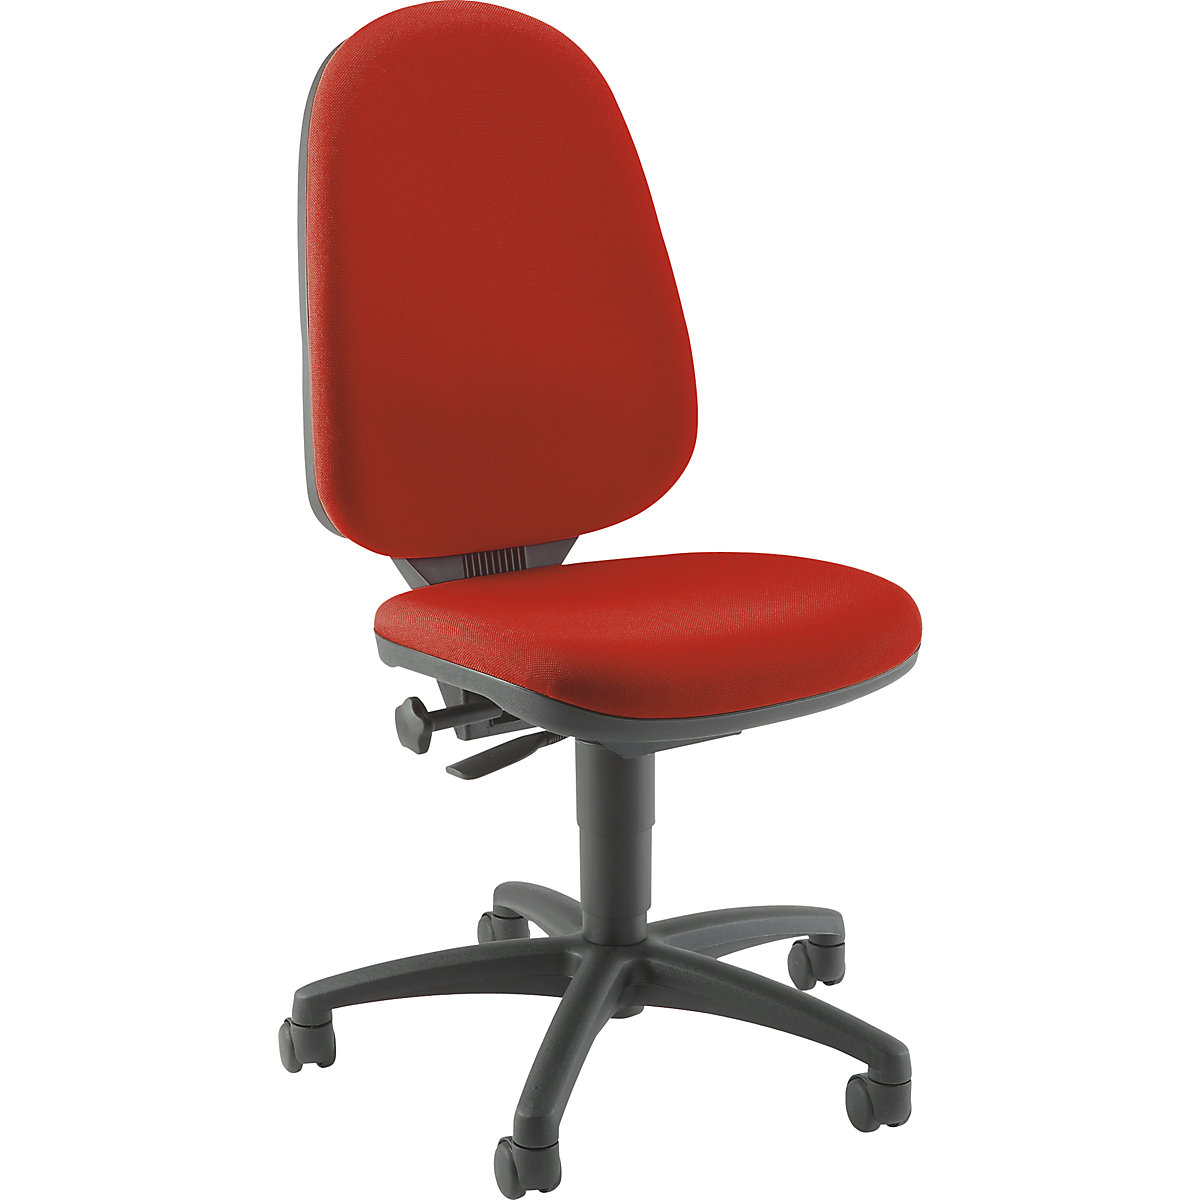 Standard swivel chair – Topstar, without arm rests, back rest 550 mm, black frame, red fabric, 2 +-3